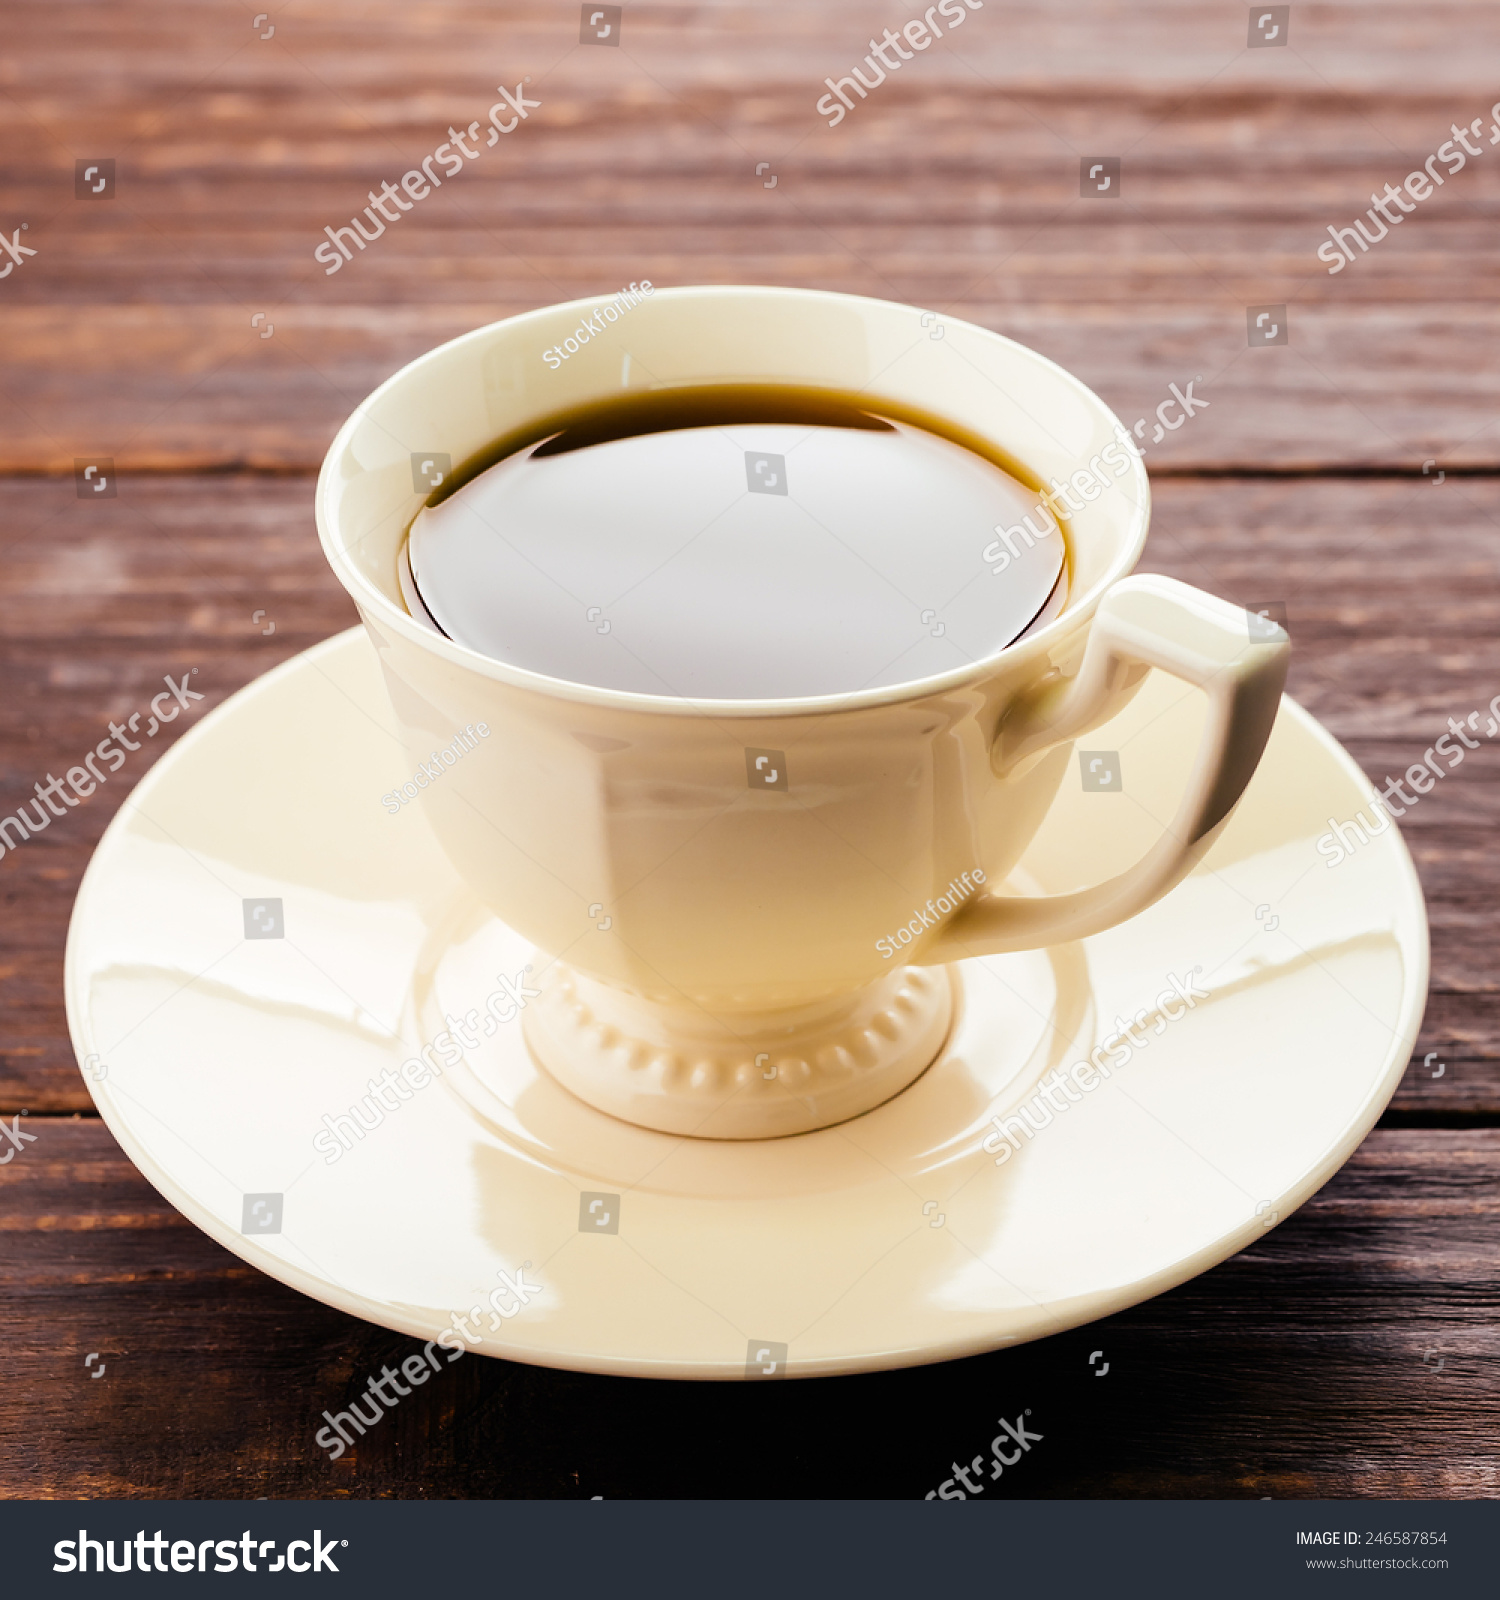 Coffee mug on wood background - Vintage effect style pictures #246587854